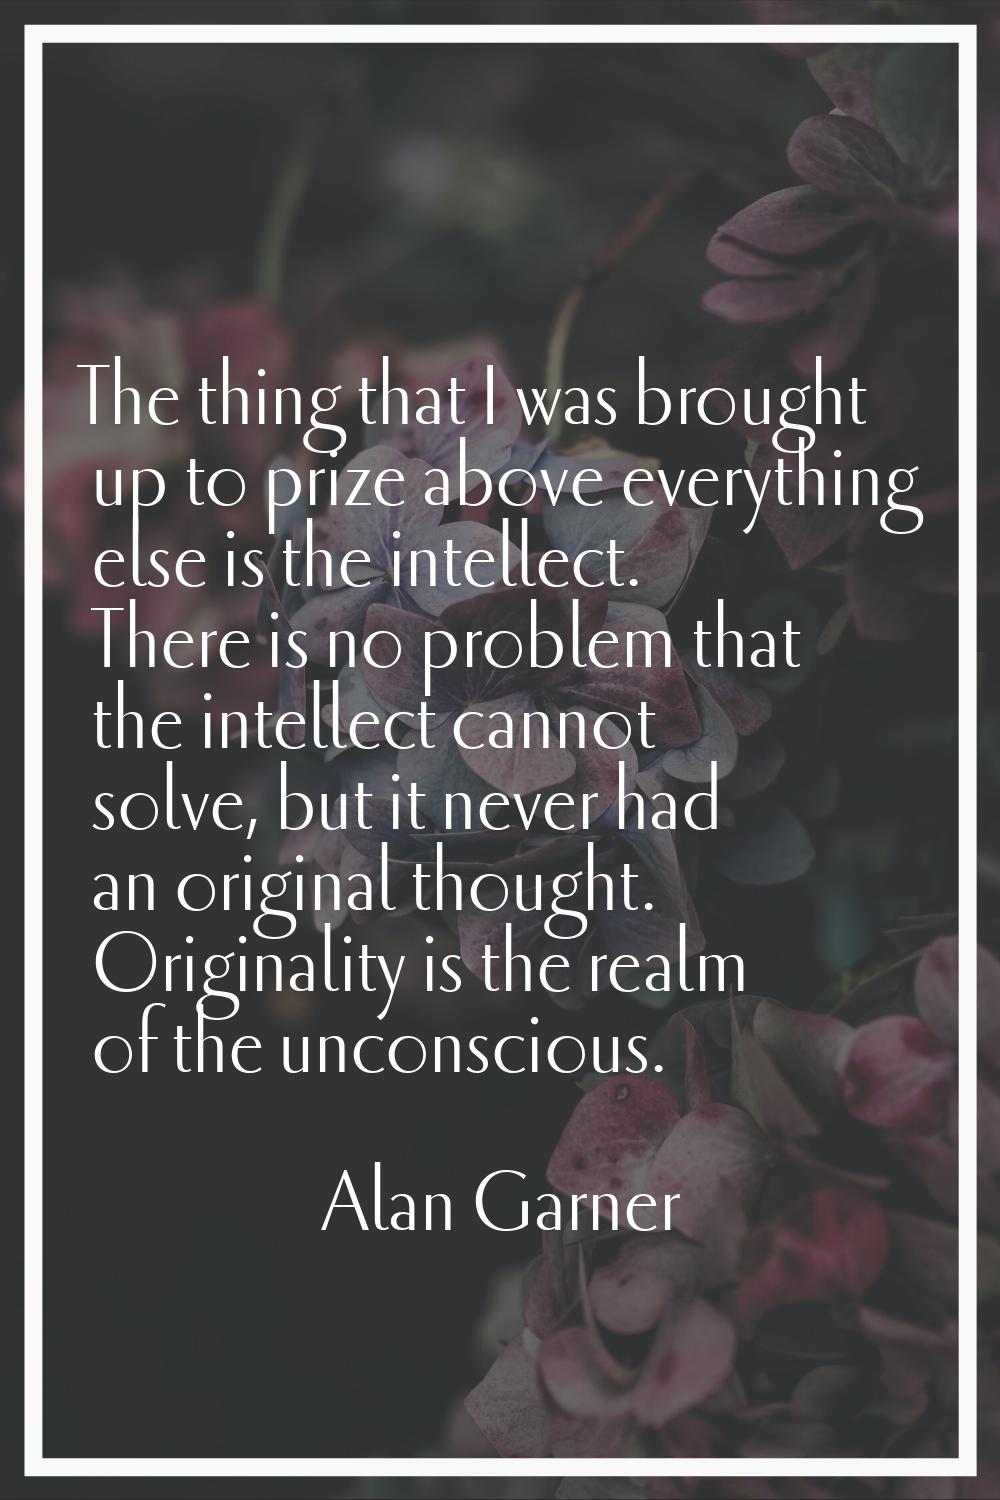 The thing that I was brought up to prize above everything else is the intellect. There is no proble